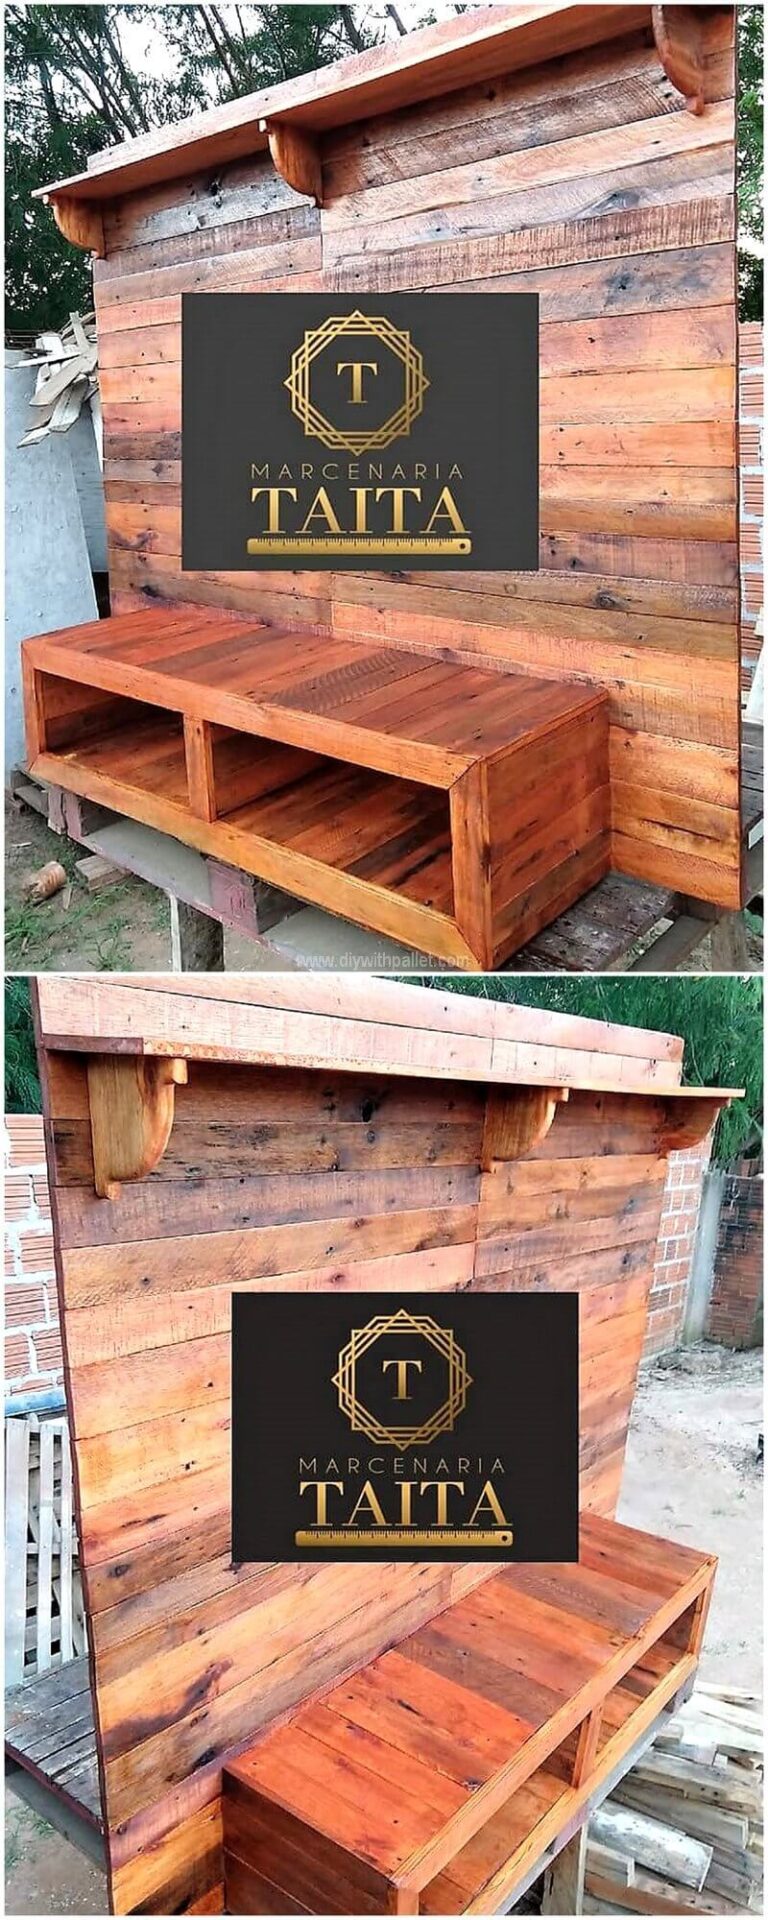 Creative Things To Do With Used Wood Pallets | Wood Pallet Creations